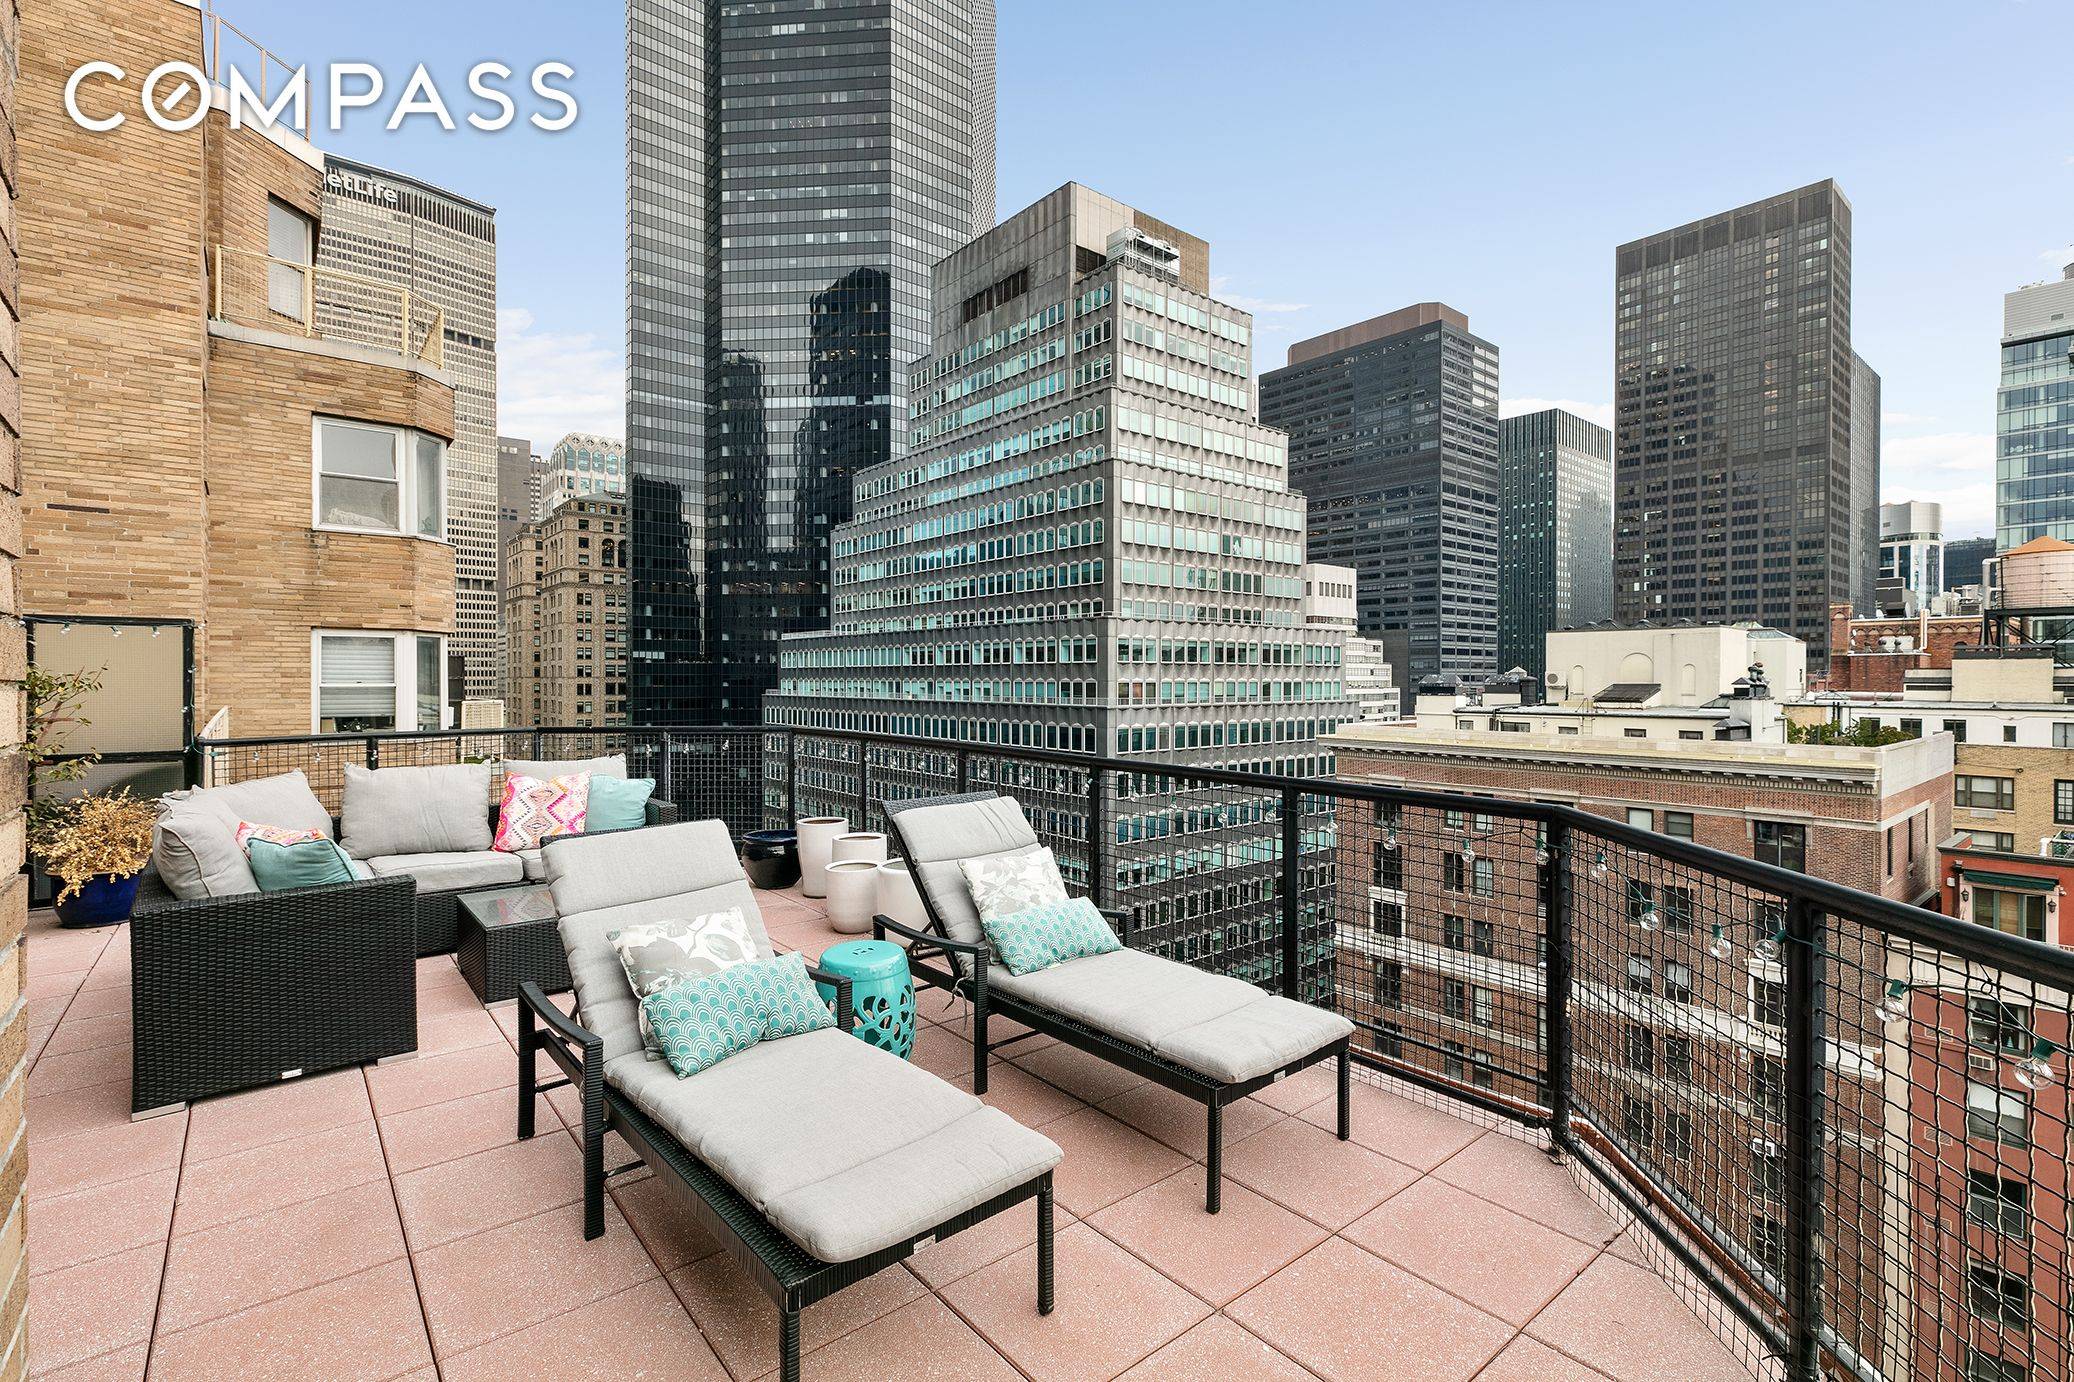 A great opportunity to rent this high floor expansive apartment with all the bells and whistles.